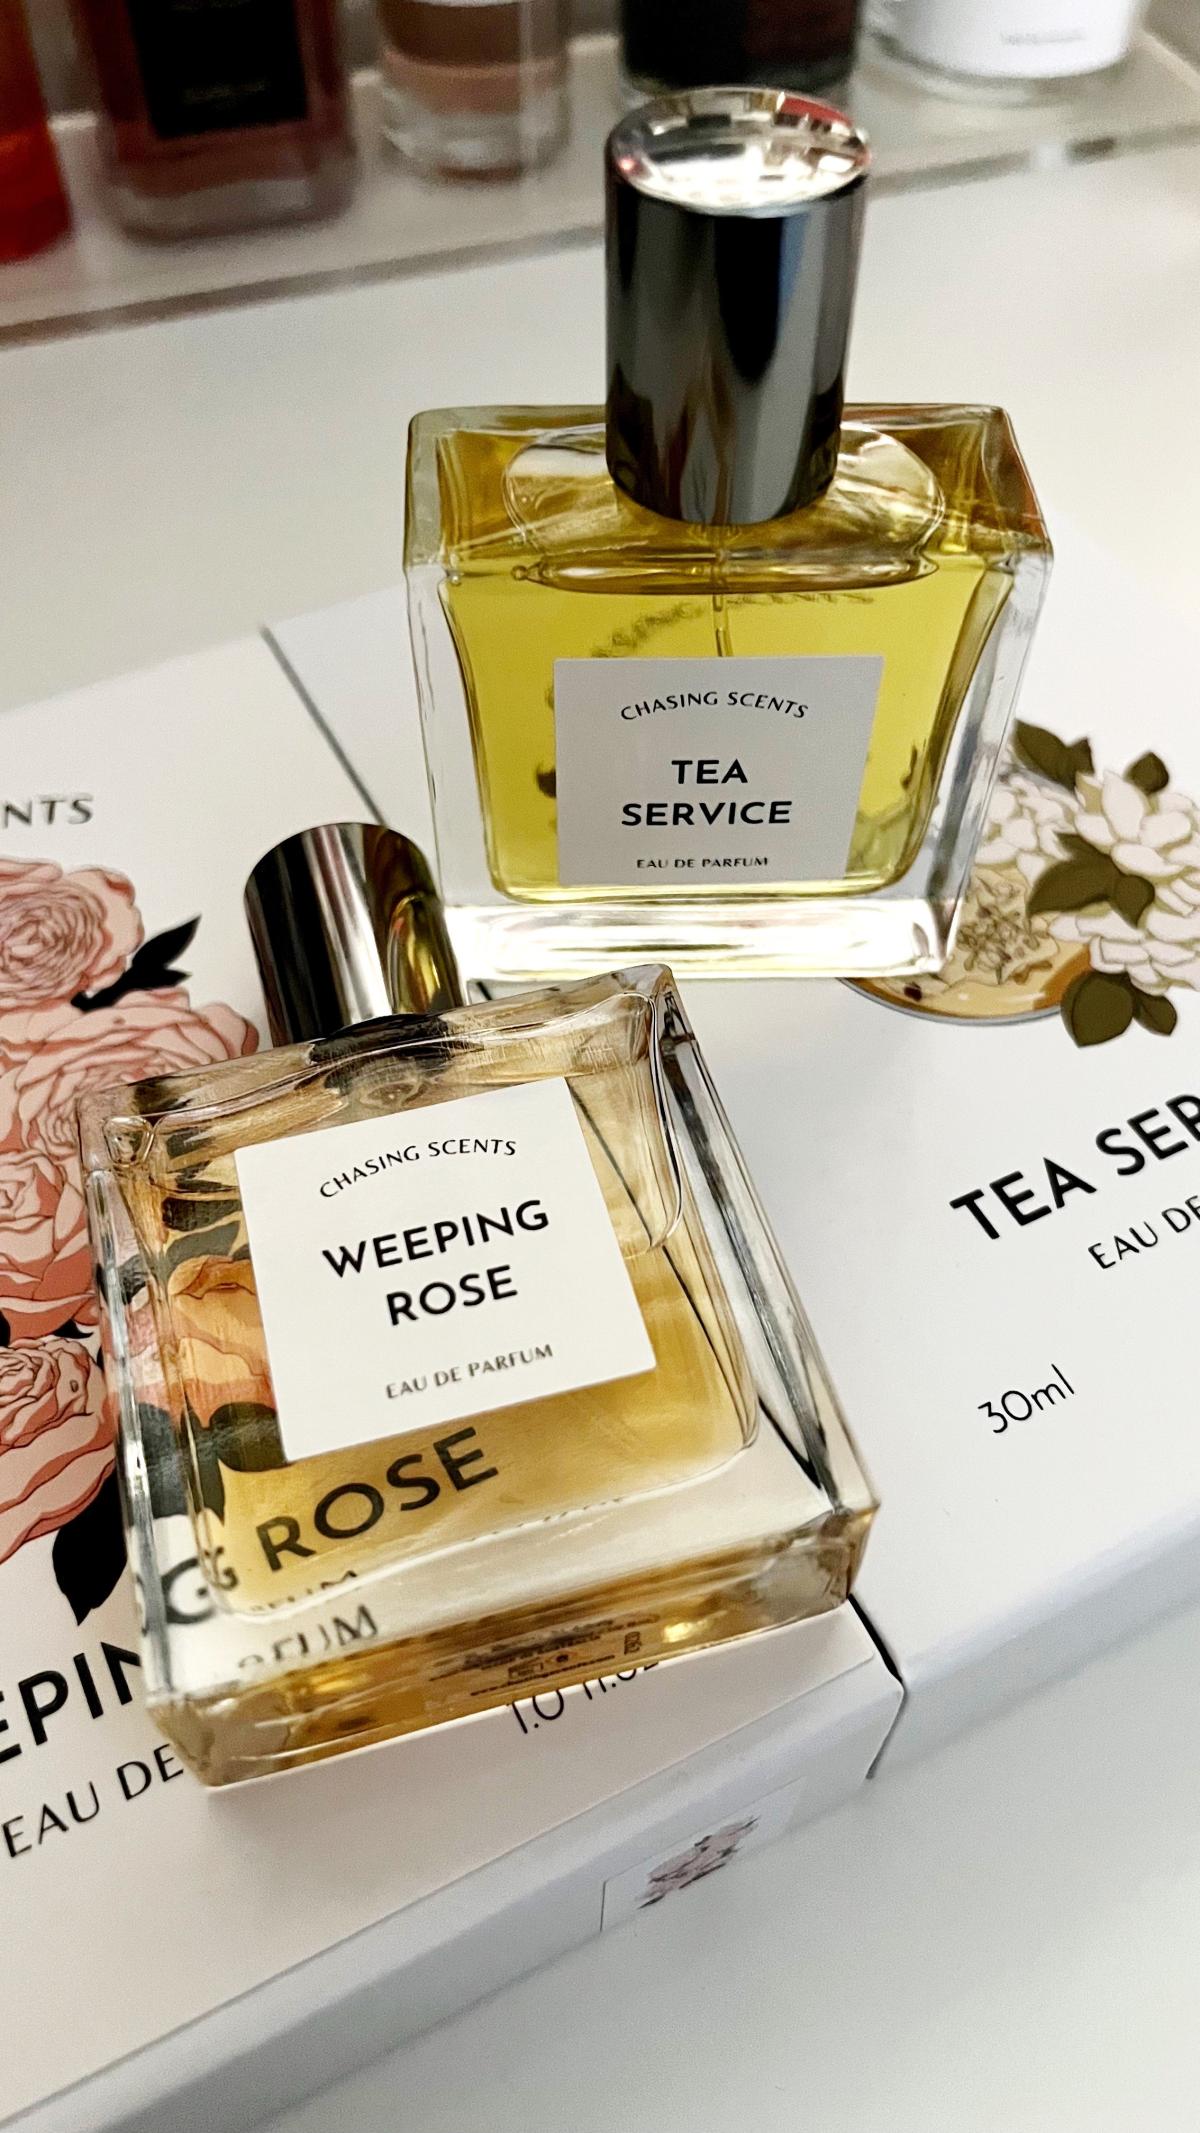 WEEPING ROSE – Chasing Scents